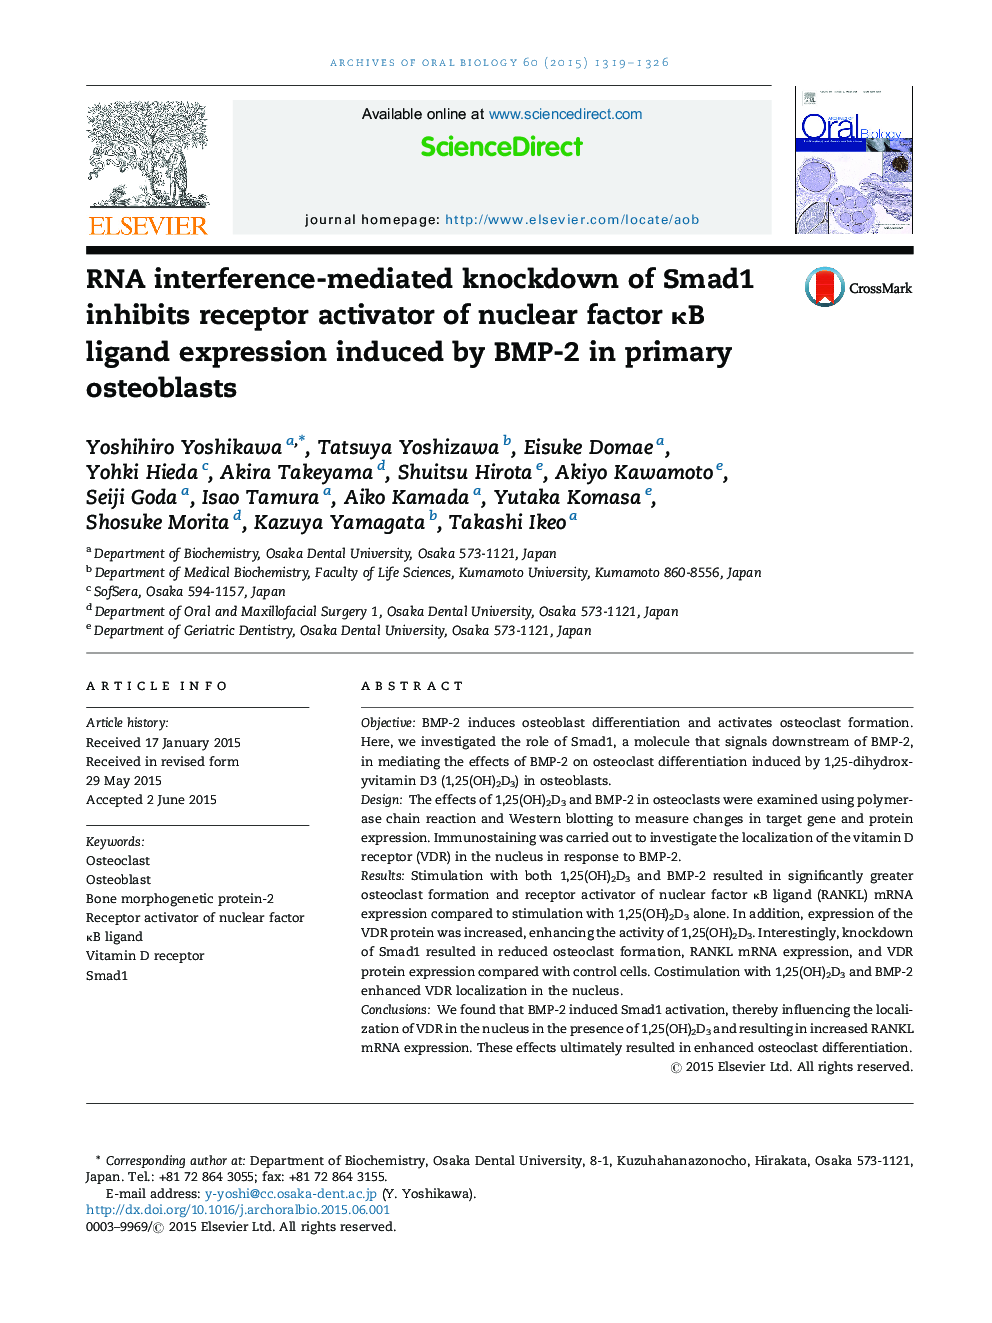 RNA interference-mediated knockdown of Smad1 inhibits receptor activator of nuclear factor ÎºB ligand expression induced by BMP-2 in primary osteoblasts